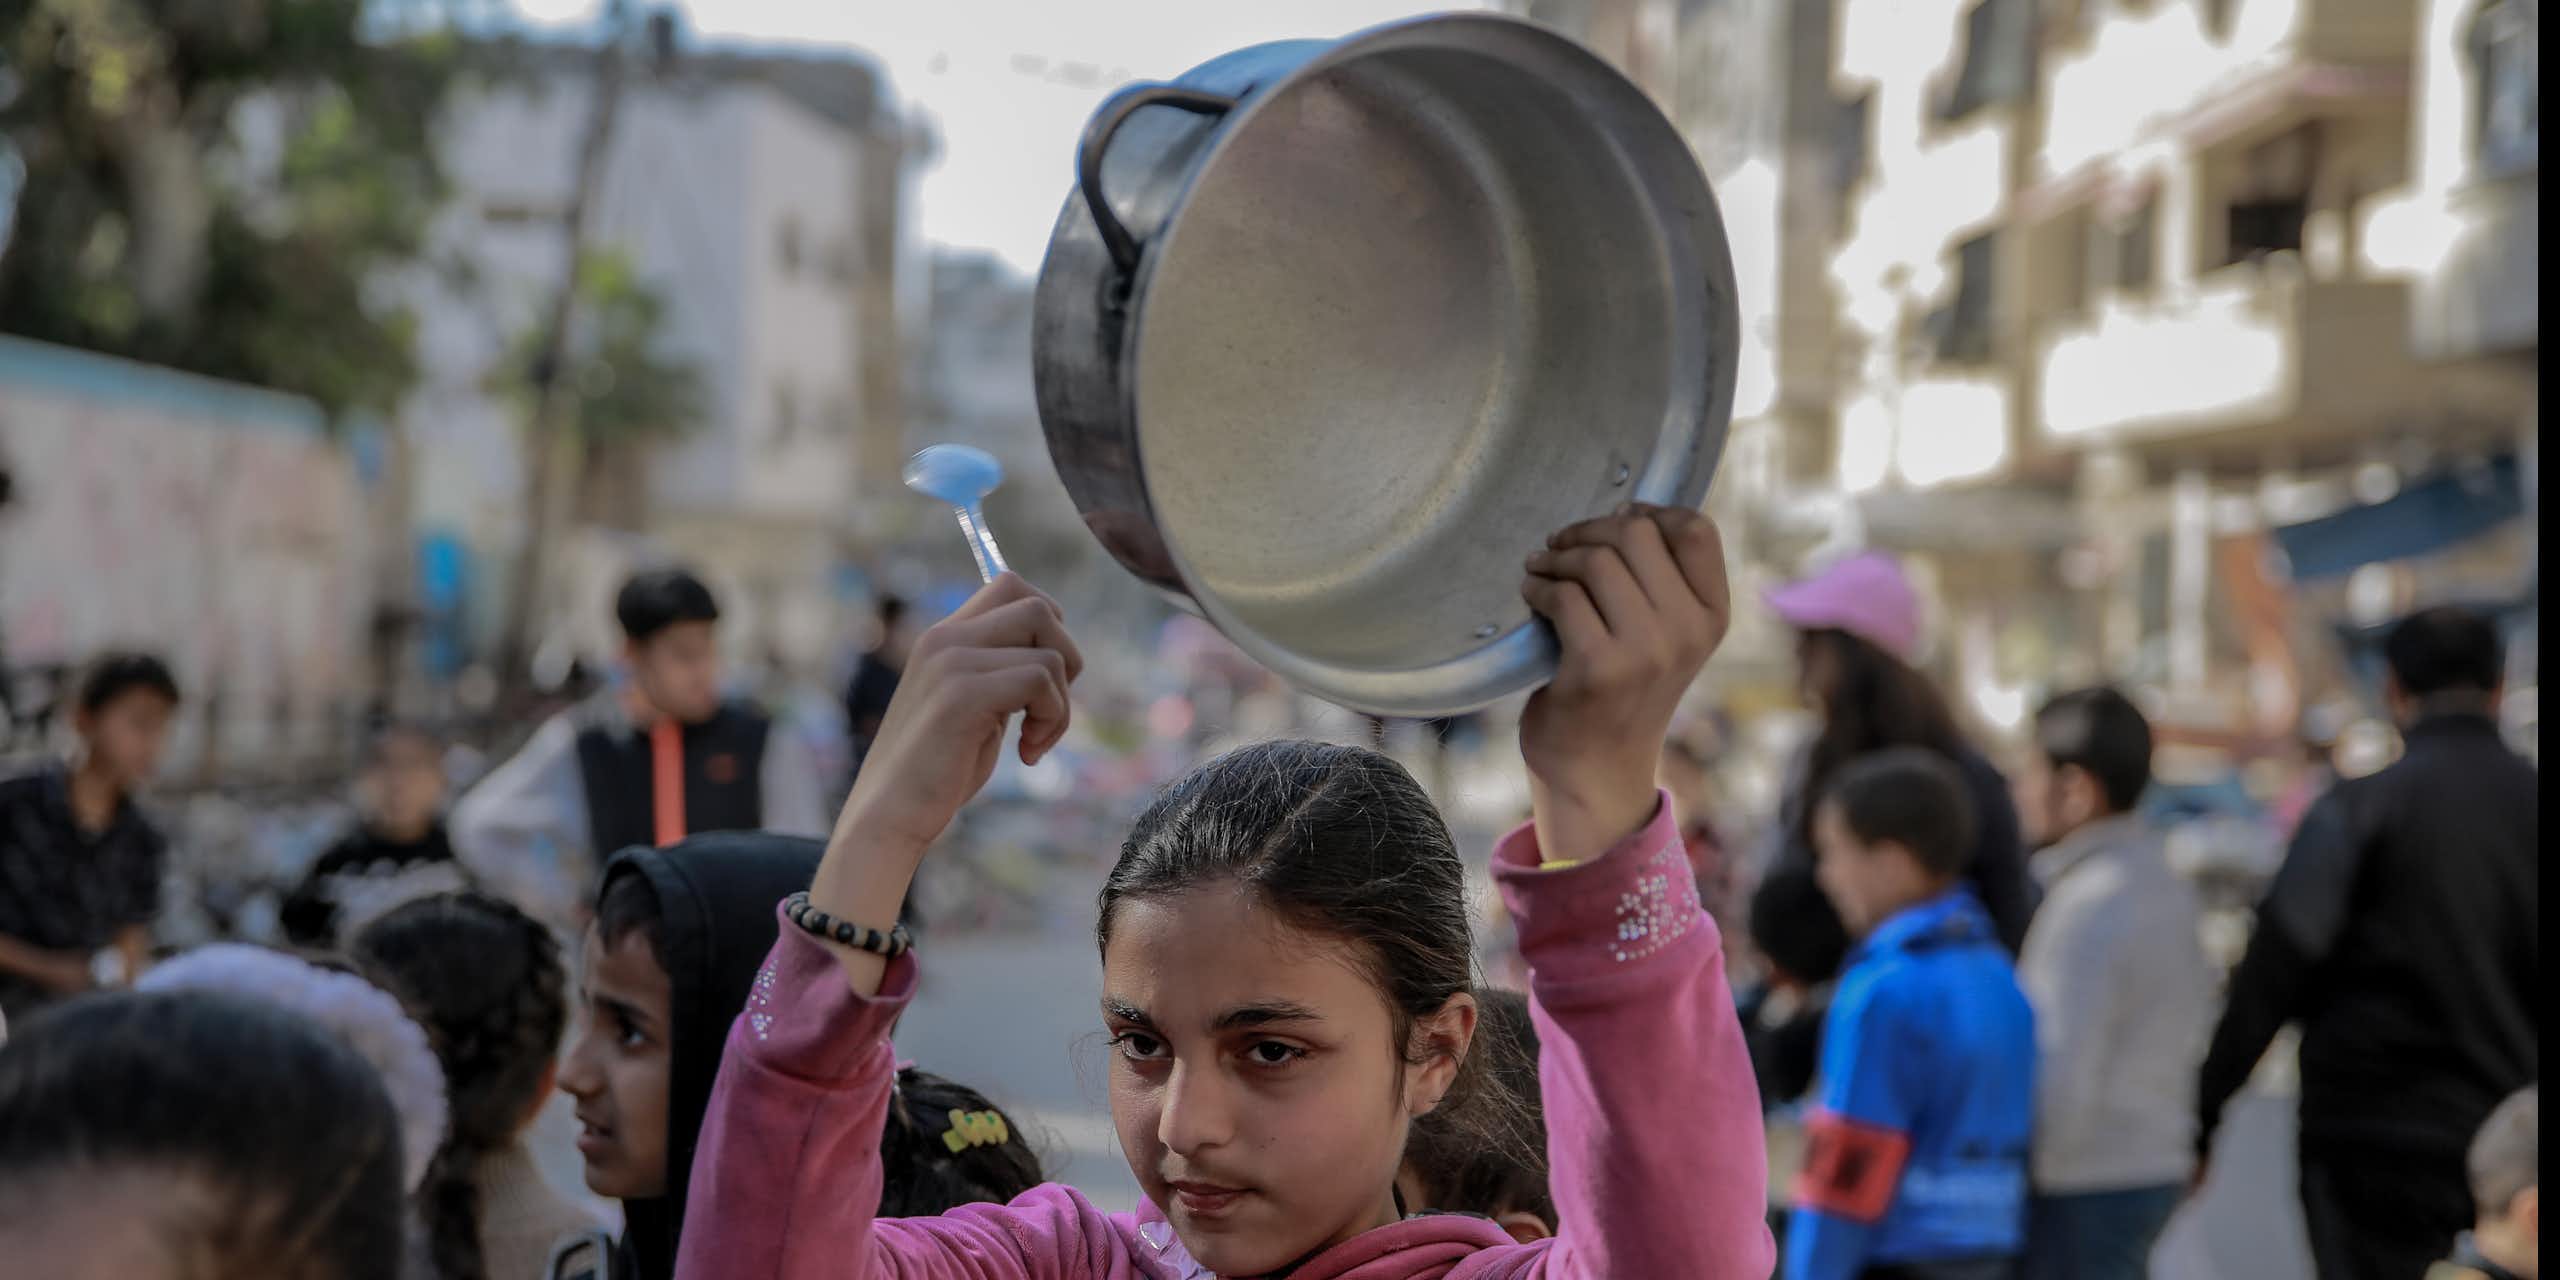 A girl in a pink top holds an empty cooking pot over her head.